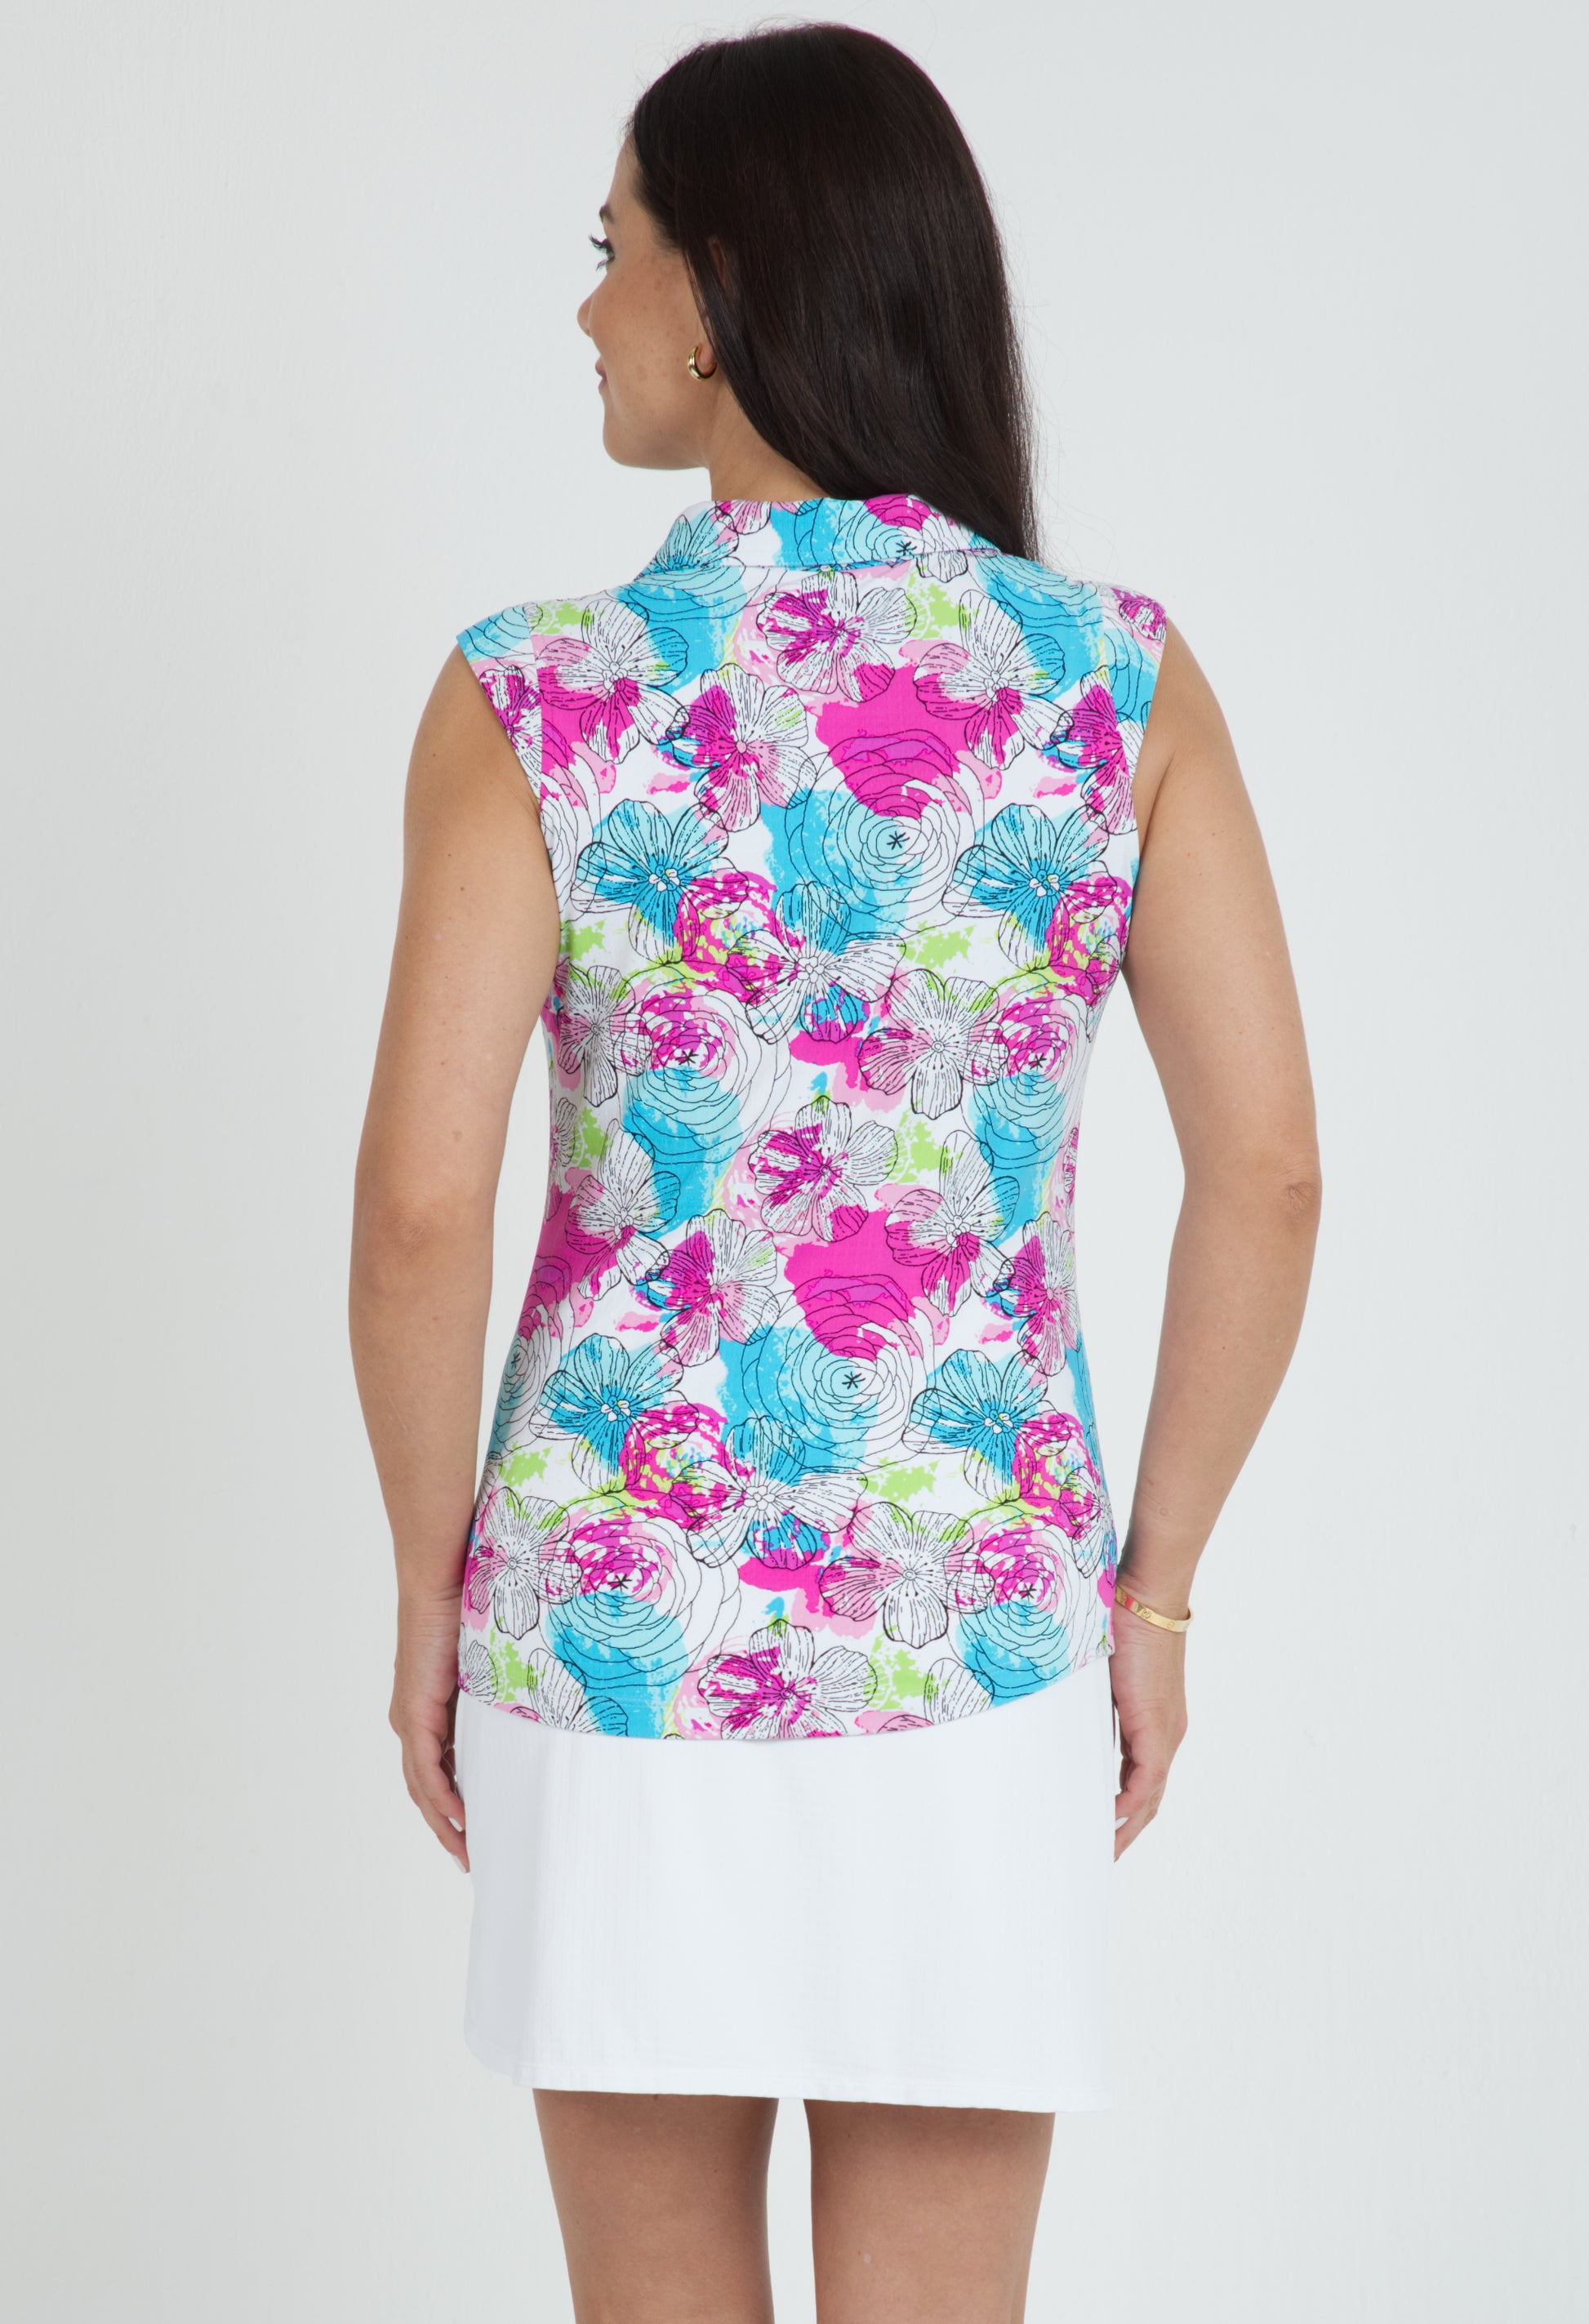 IBKÜL - Paddy Print Sleeveless Polo – 14757 - Color: Hot Pink Multi